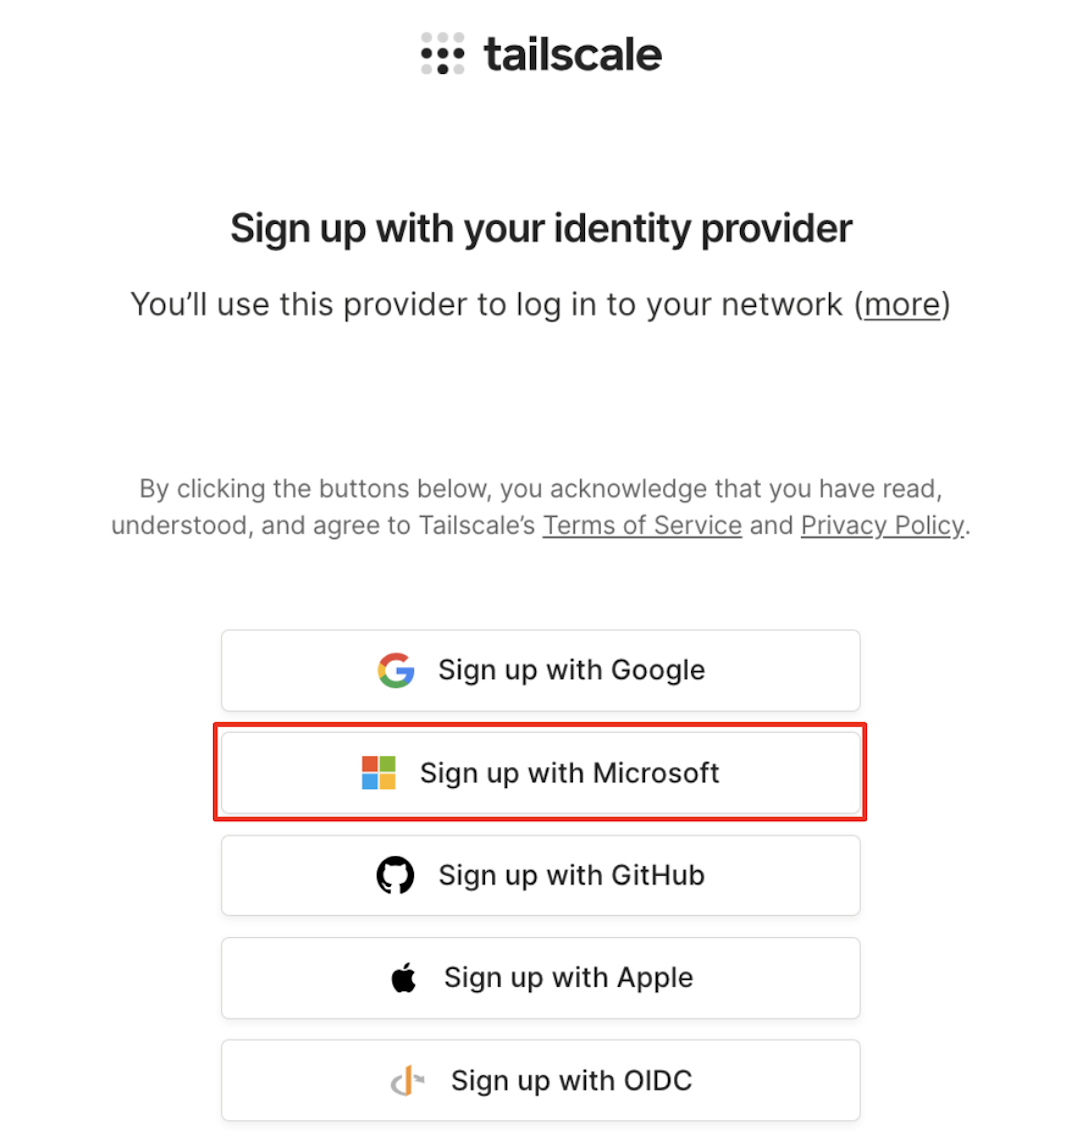 Select Microsoft when signing up to Tailscale